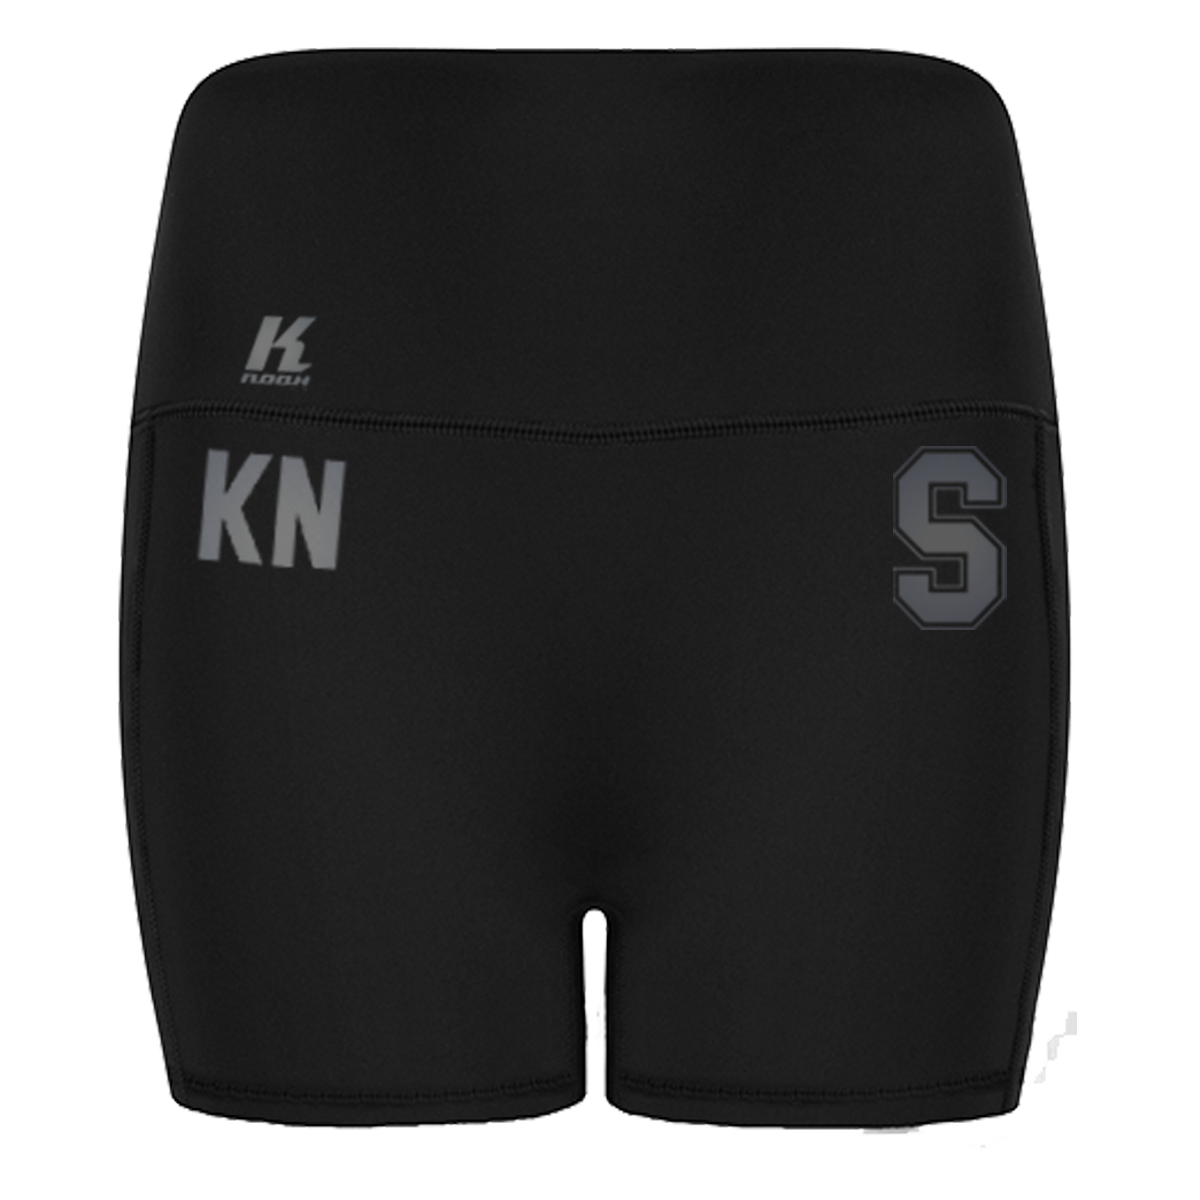 Scorpions "Blackline" Womens Core Pocket Short TL372 with Initials/Playernumber